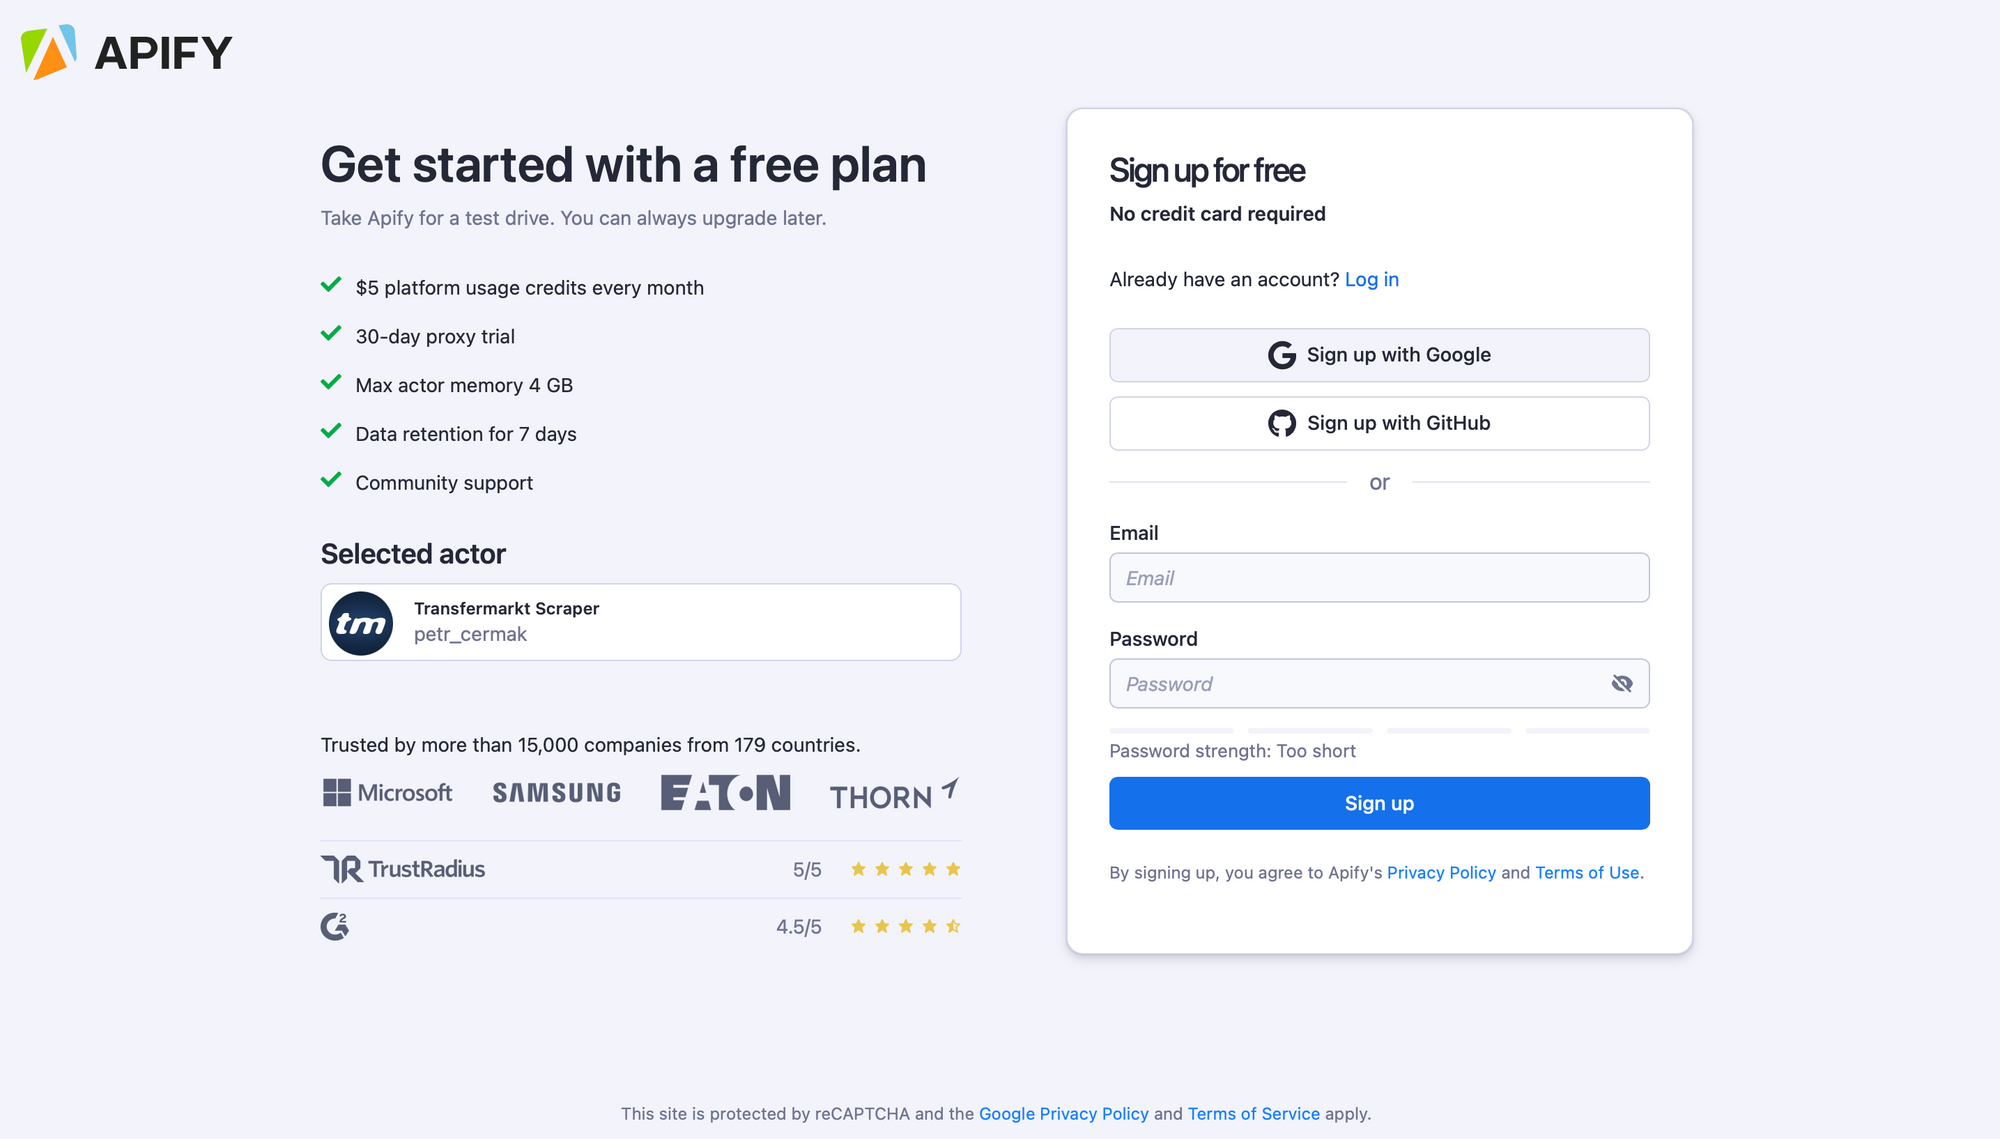 Screenshot of the login form with options for quick sign in as well as details about the free plan and companies using the platform.